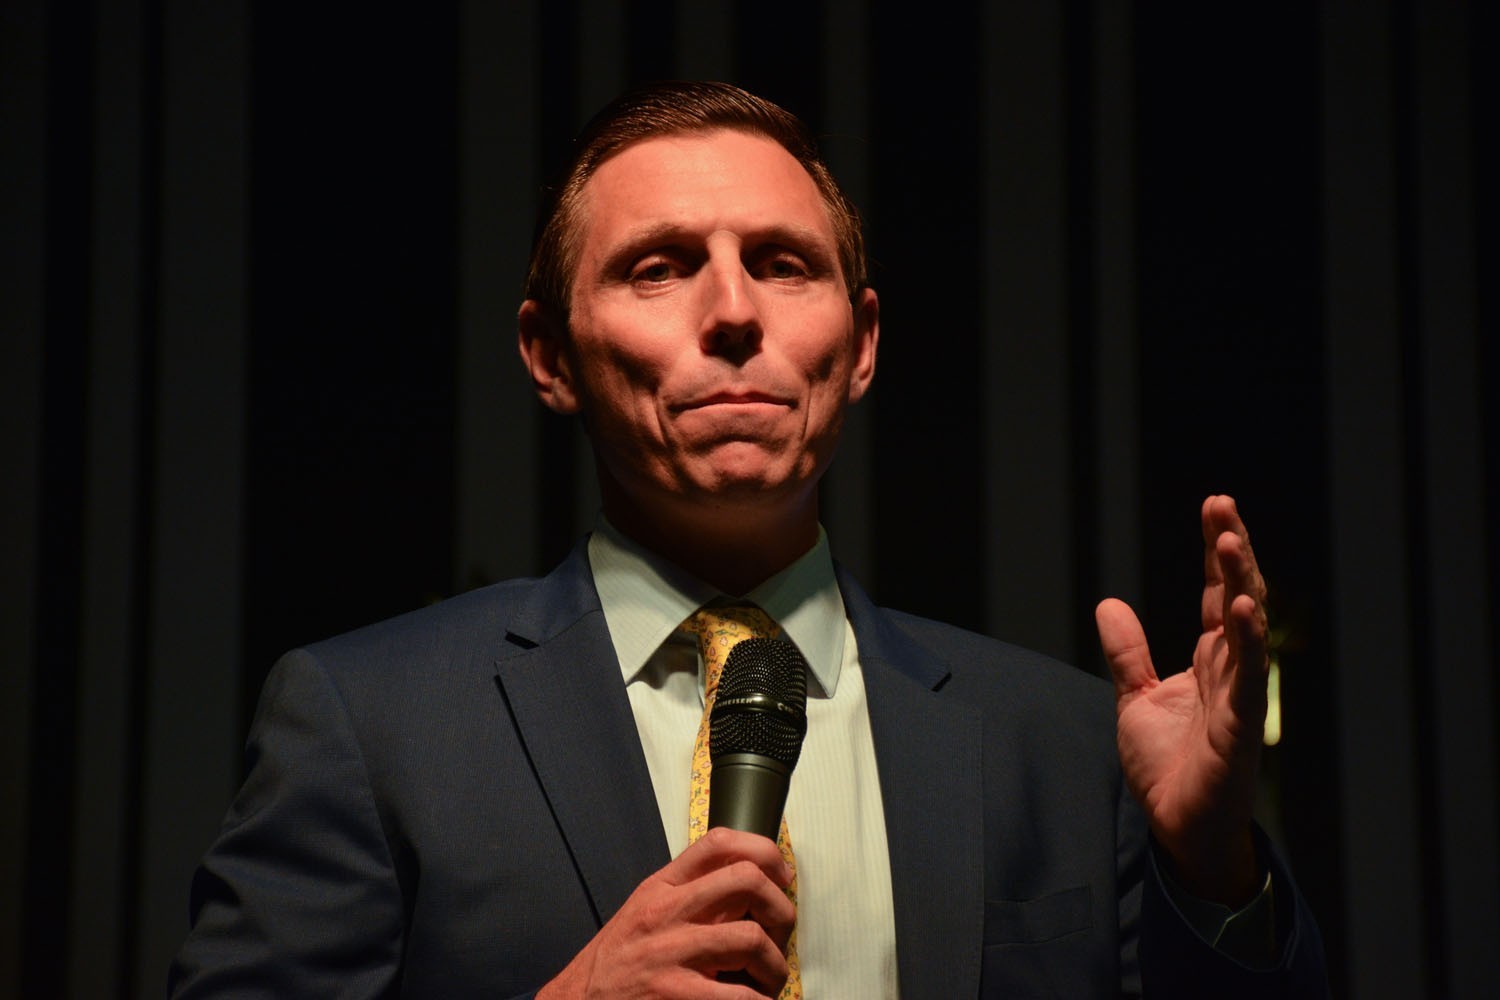 After four years of broken promises, Black community advocates call for Bramptonians to vote out Patrick Brown